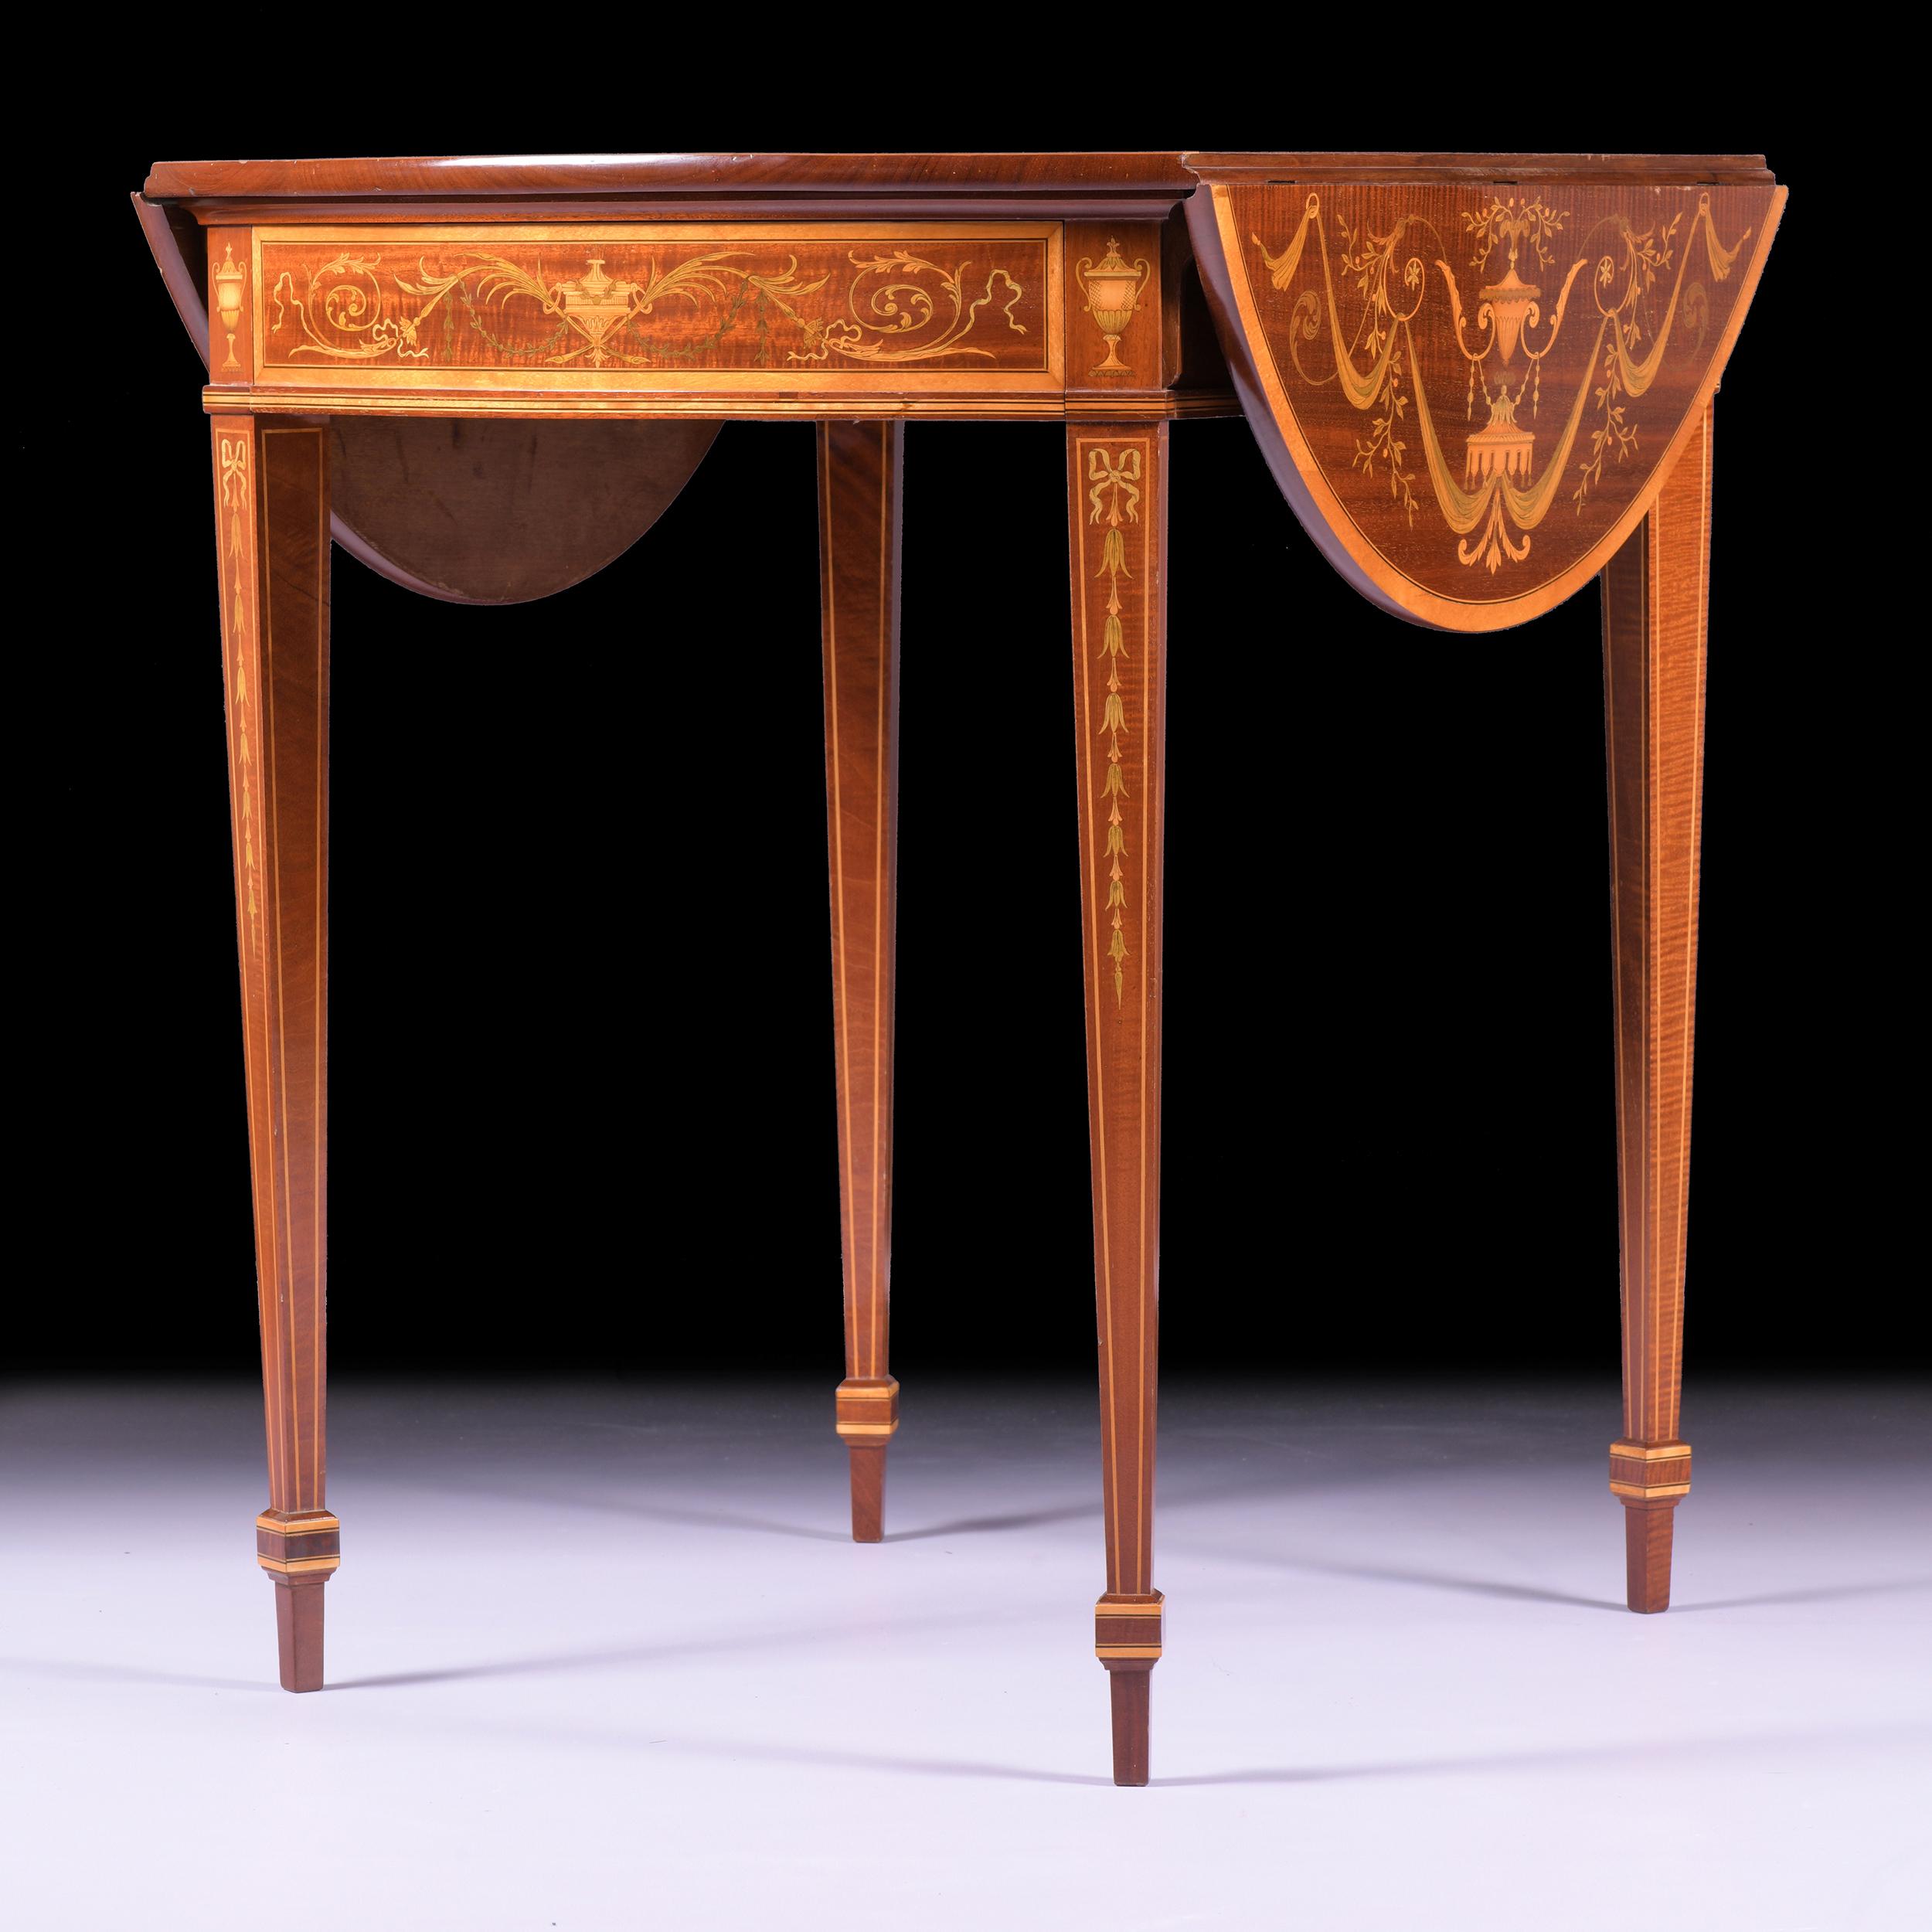 Late 19th Century English Edwardian Satinwood Pembroke Table By Edwards & Robert For Sale 1